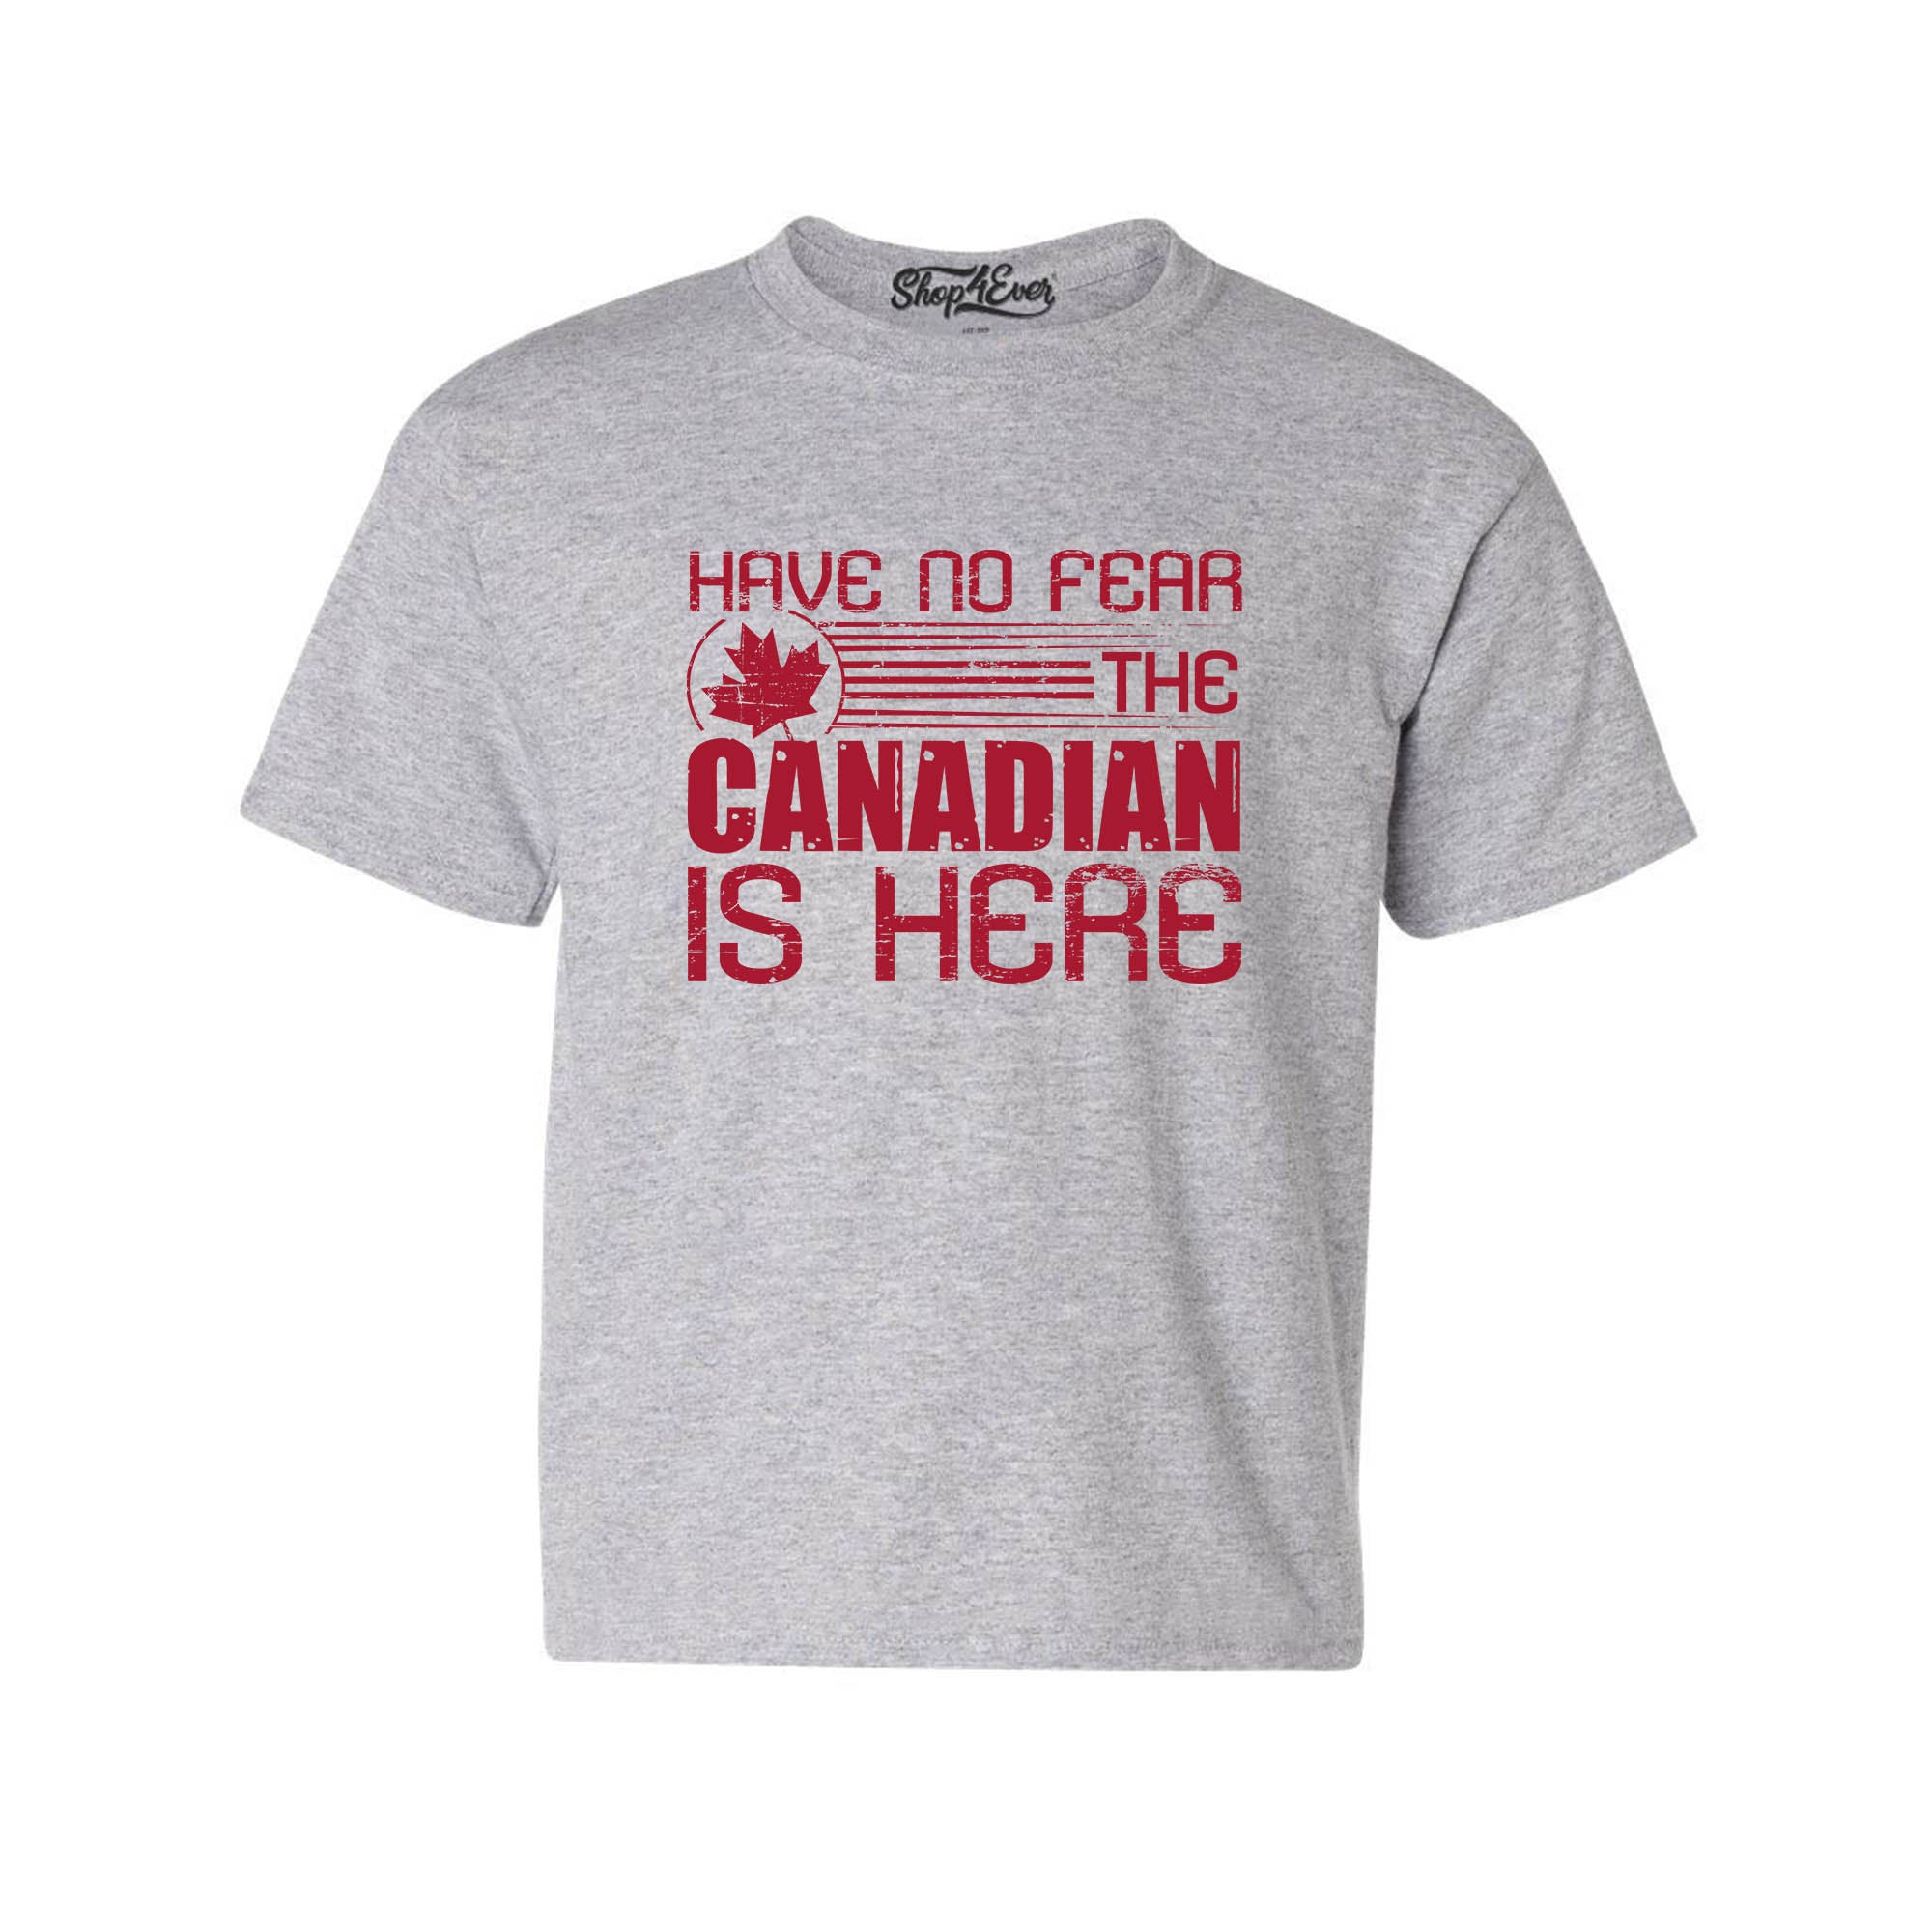 Have No Fear The Canadian is Here Canada Pride Child's T-Shirt Kids Tee